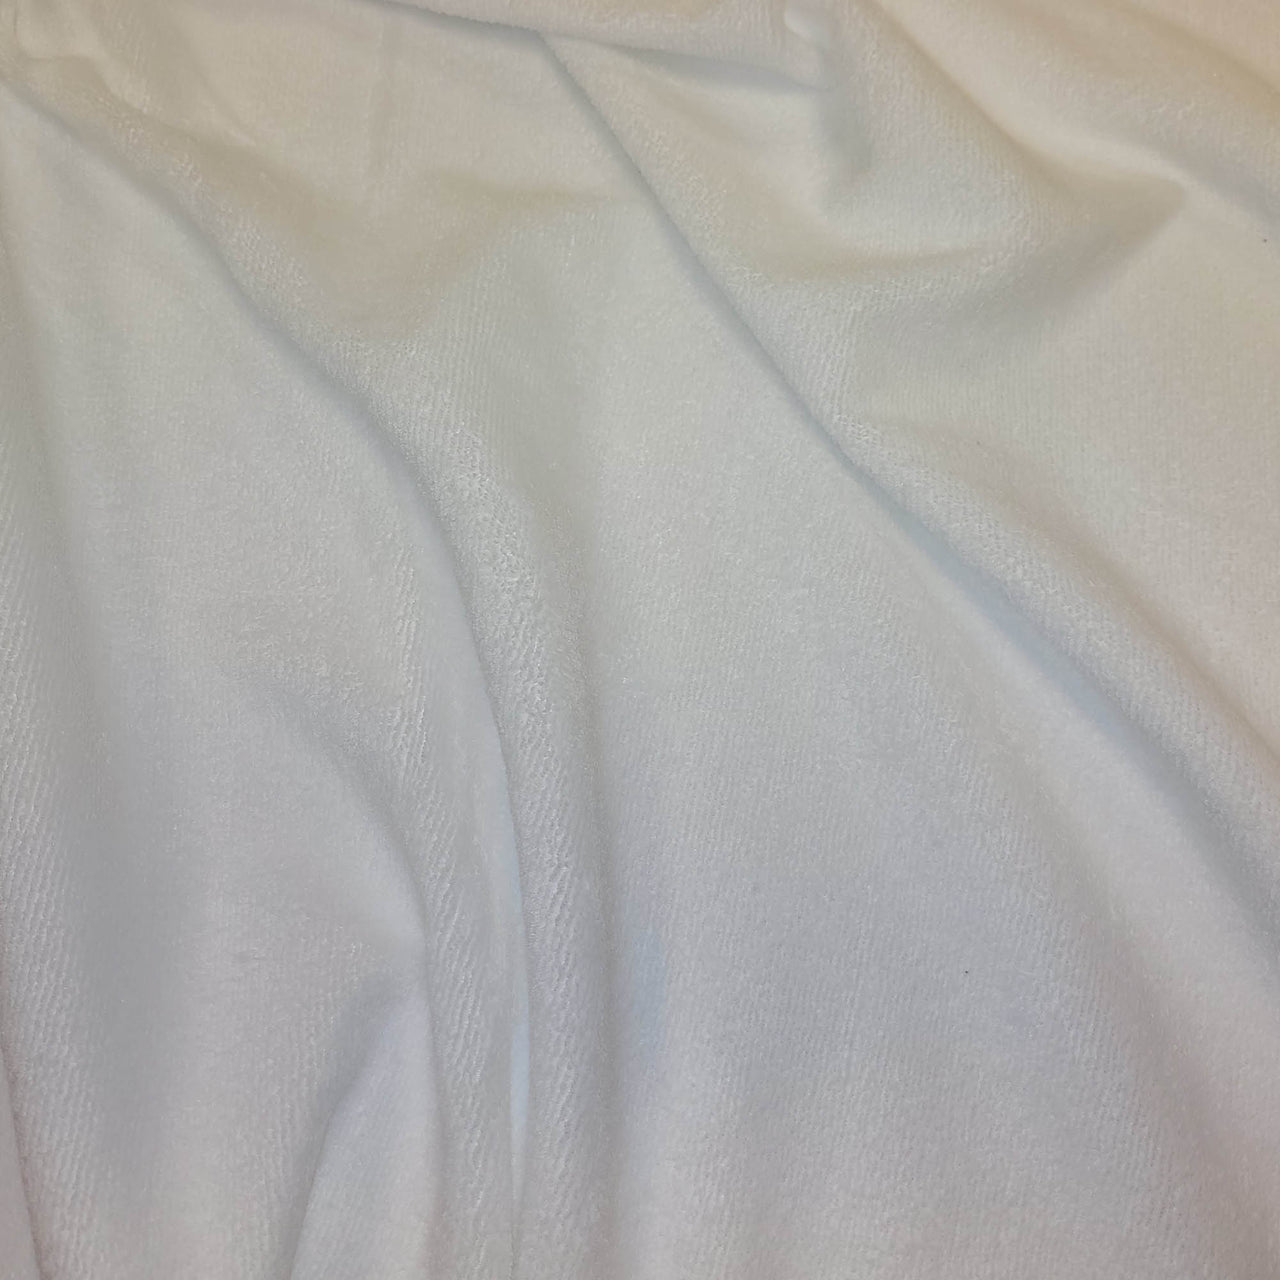 Sublimation Fabric - Microfibre Towelling - Prepared for Print Fabric